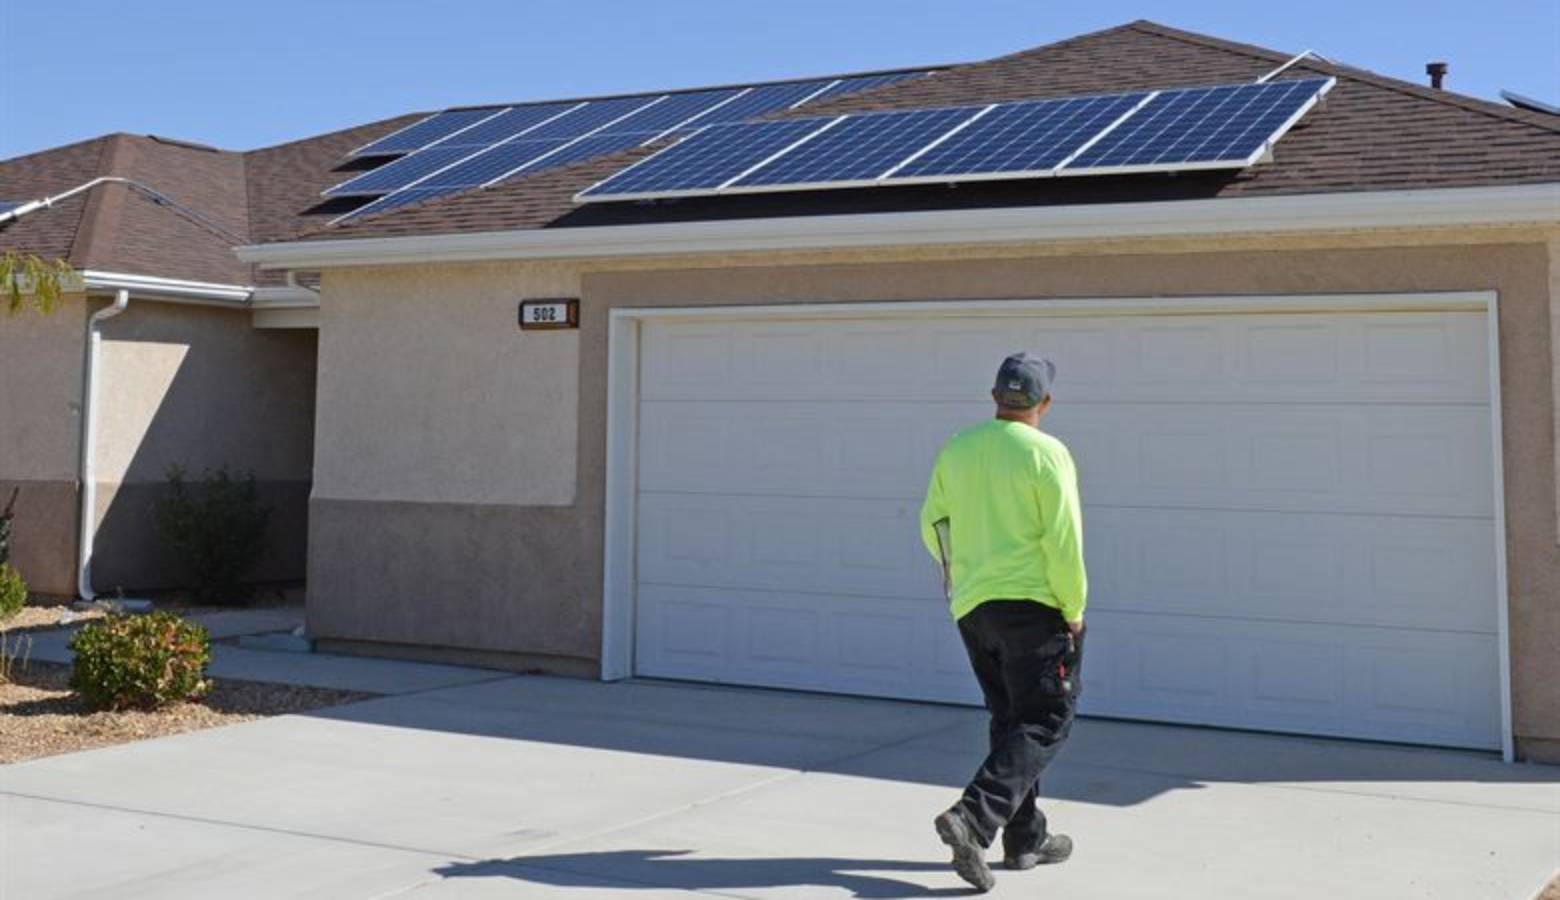 A home fitted with solar panels at Edwards Air Force Base in California, October 2017. (Kenji Thuloweit/U.S. Air Force)